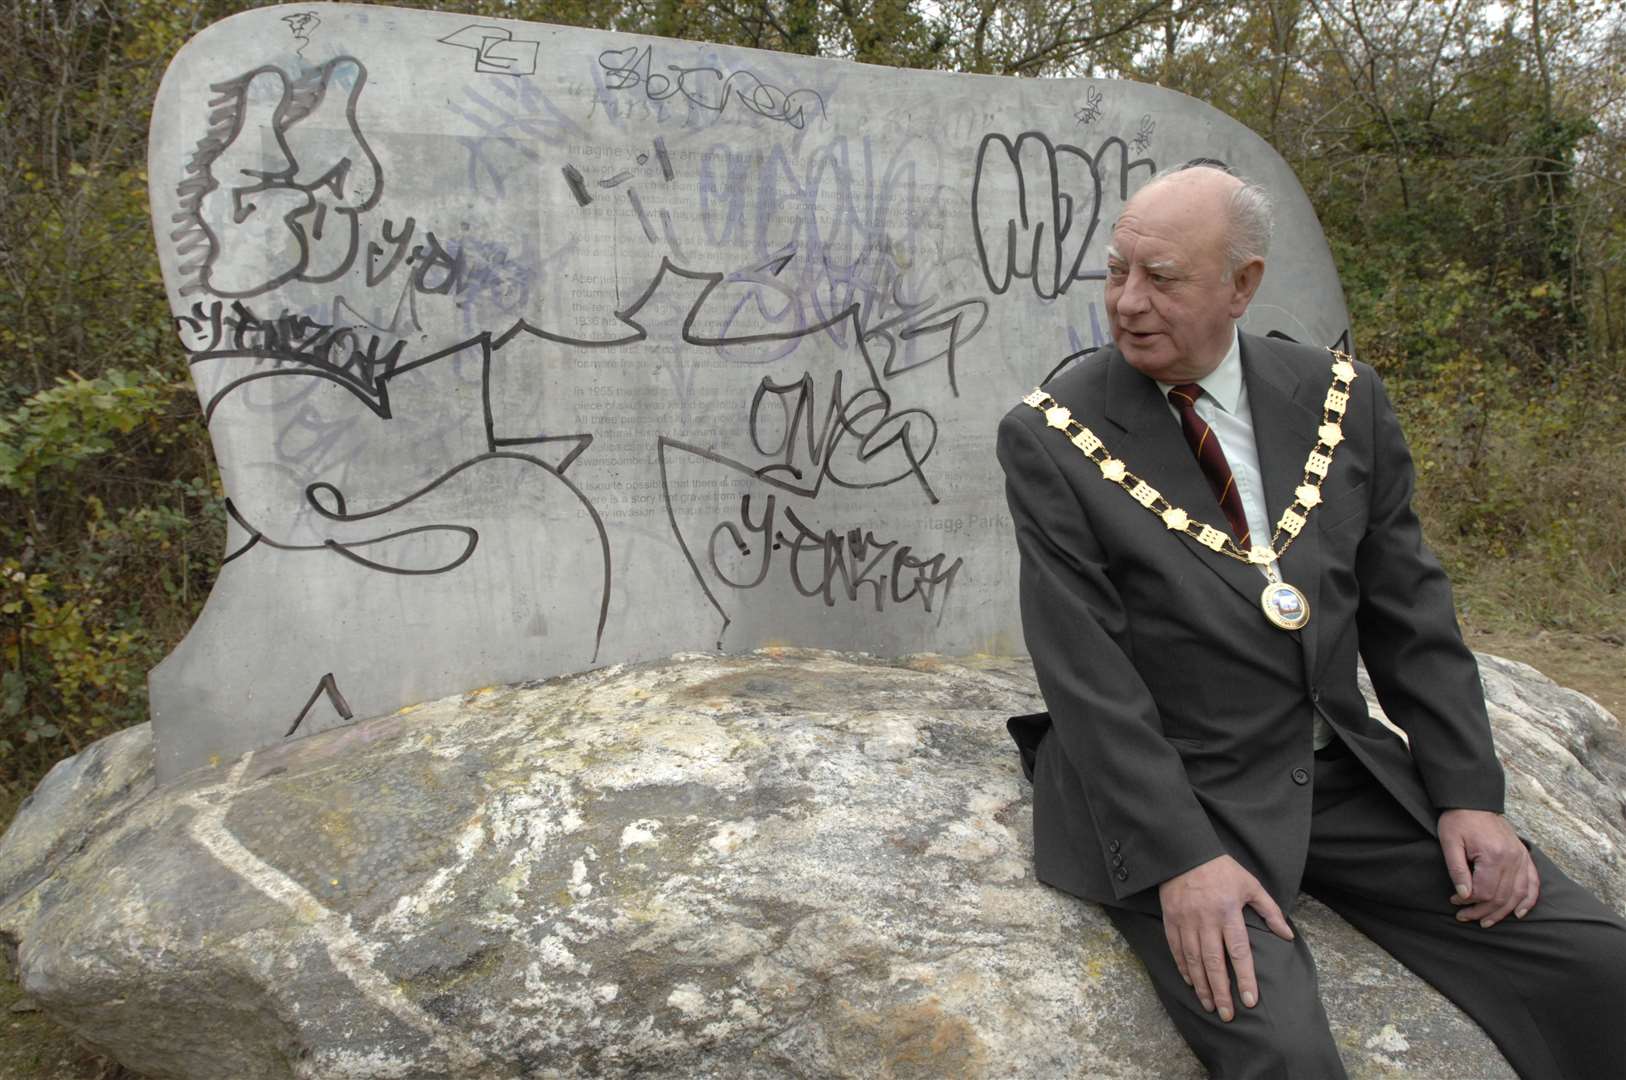 Swanscombe Heritage Park was hit by a spate of graffiti back in 2008. Picture shows mayor Bryan Read at some of the damage. Picture: Grant Falvey